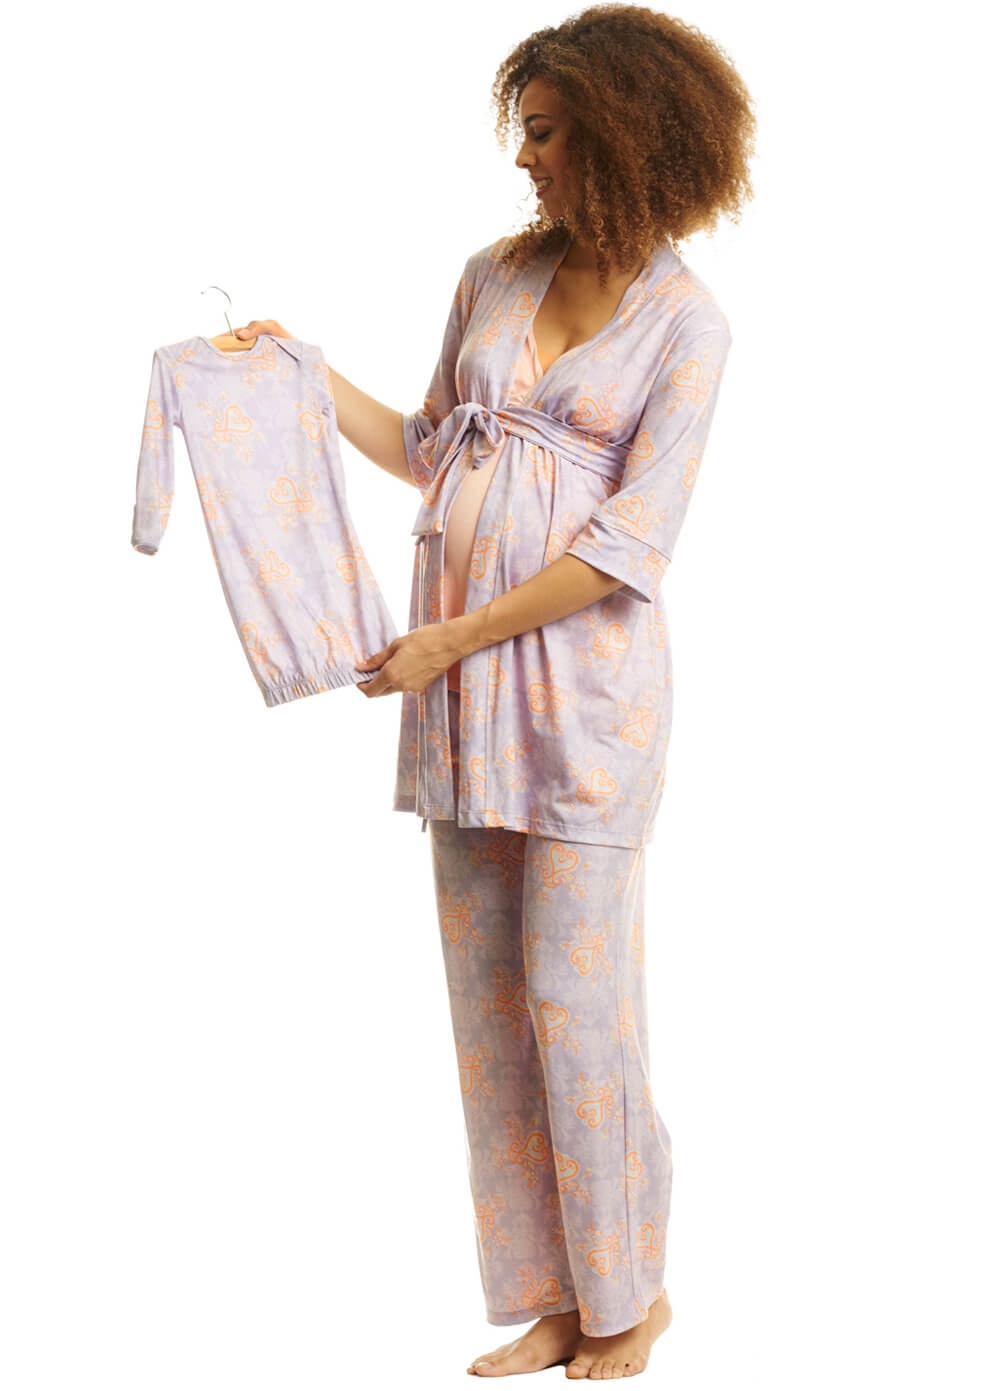 Queen Bee Analise Mommy & Me PJ Gift Set in Lilac Boho by Everly Grey 